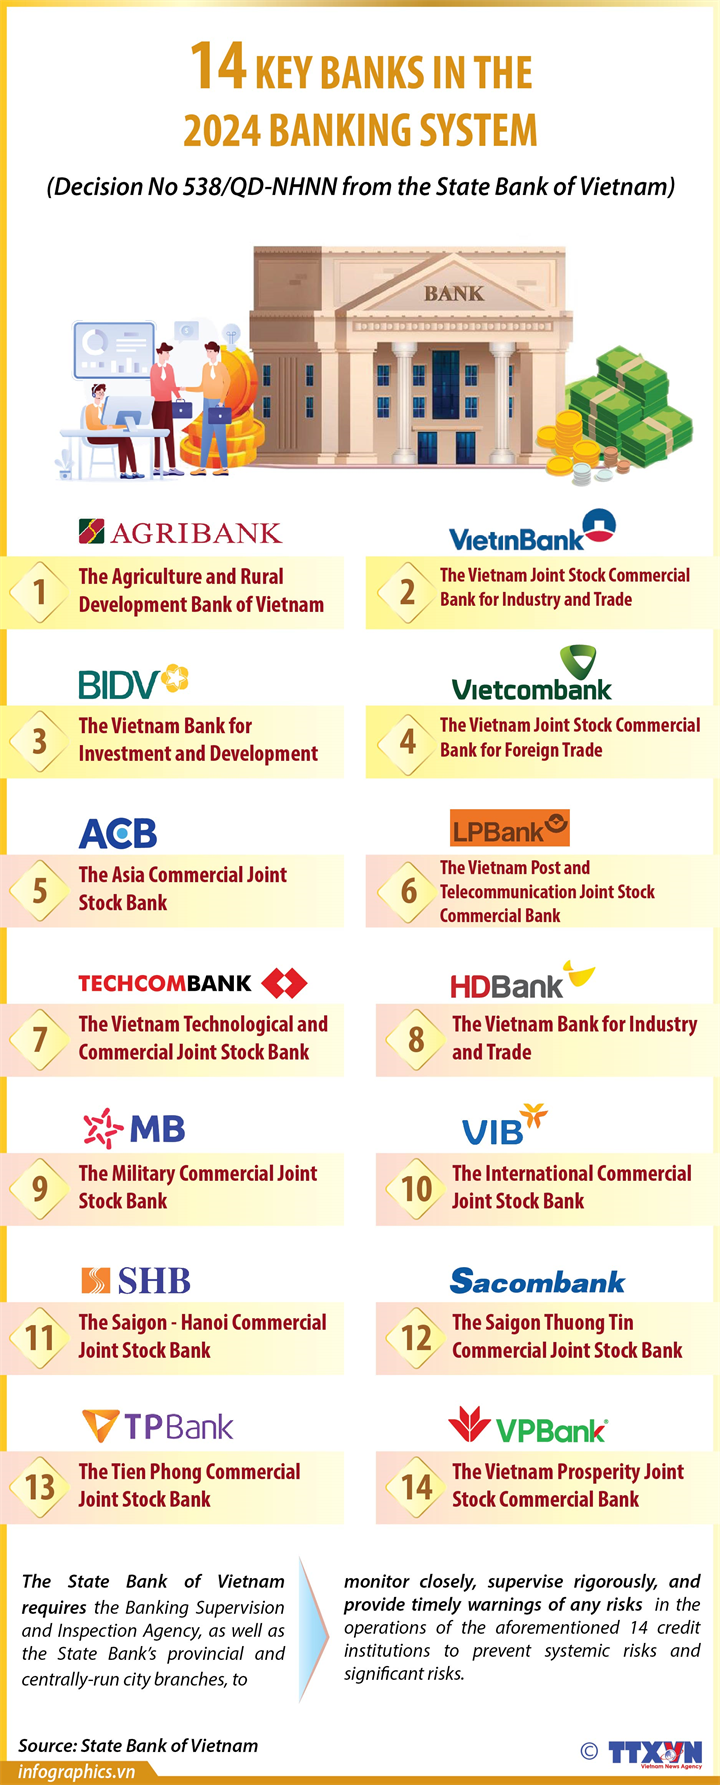 14 key banks in the 2024 banking system